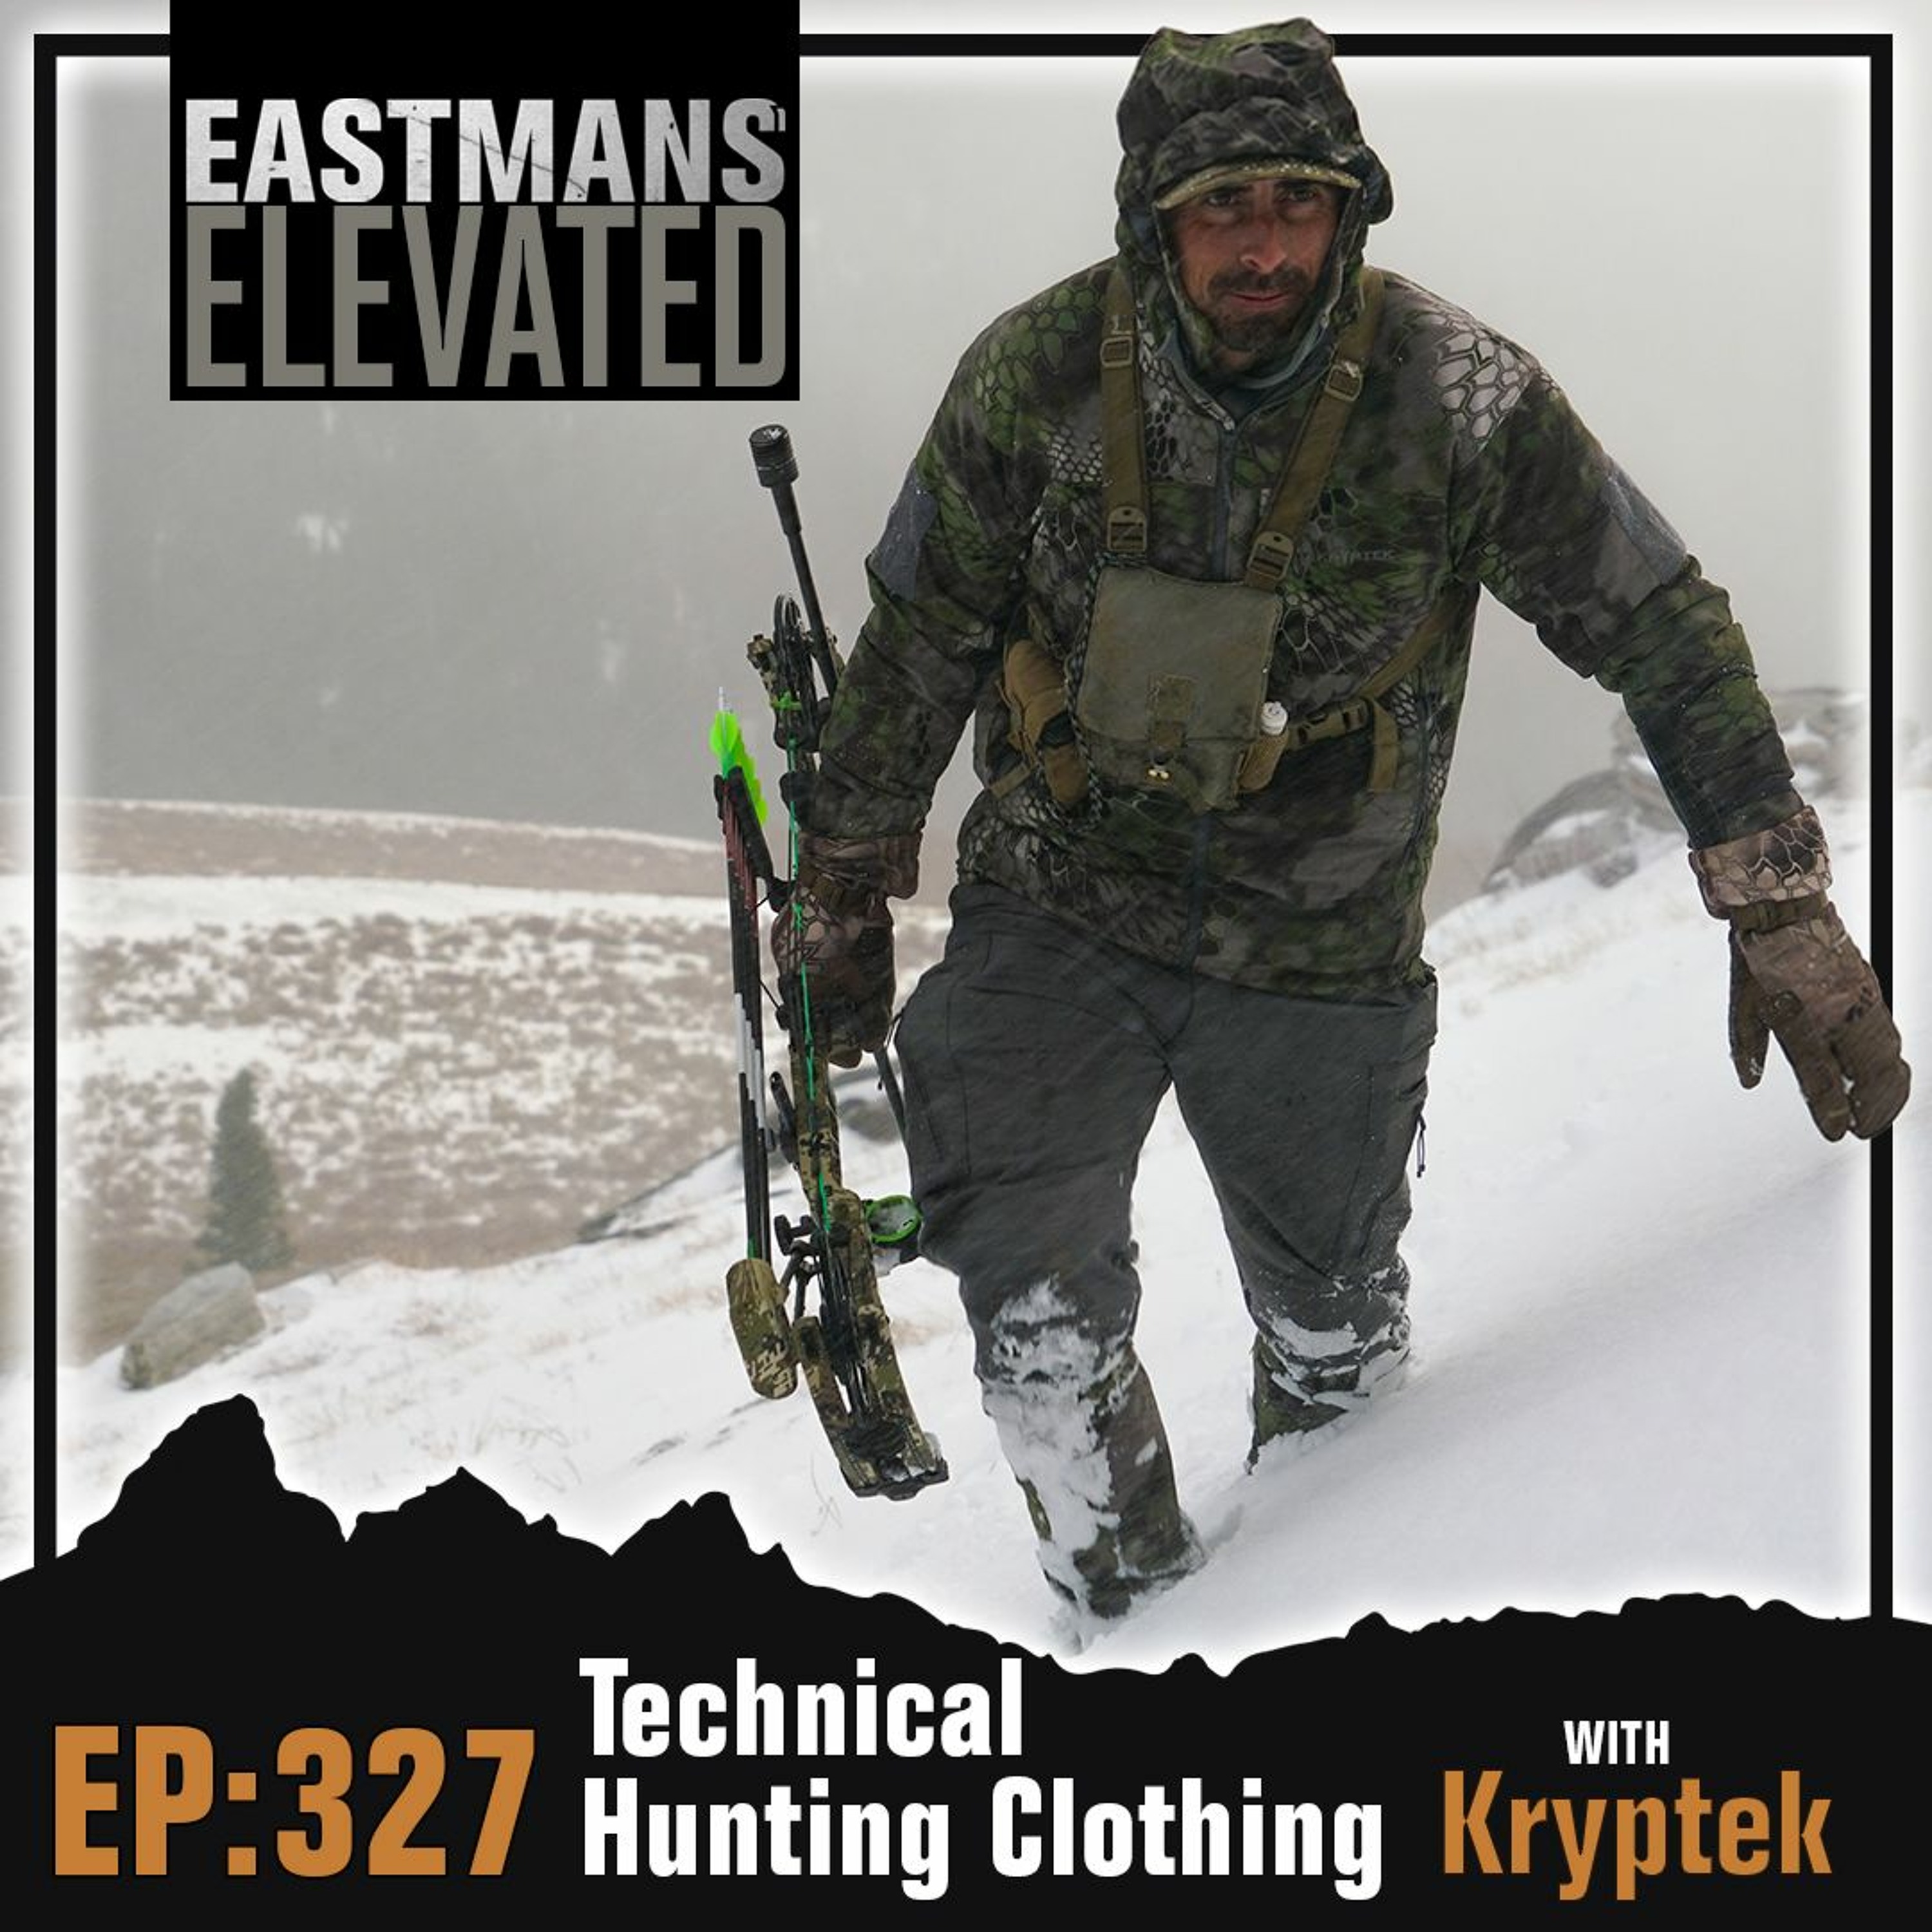 Episode 327: Technical Hunting Clothing with Kryptek